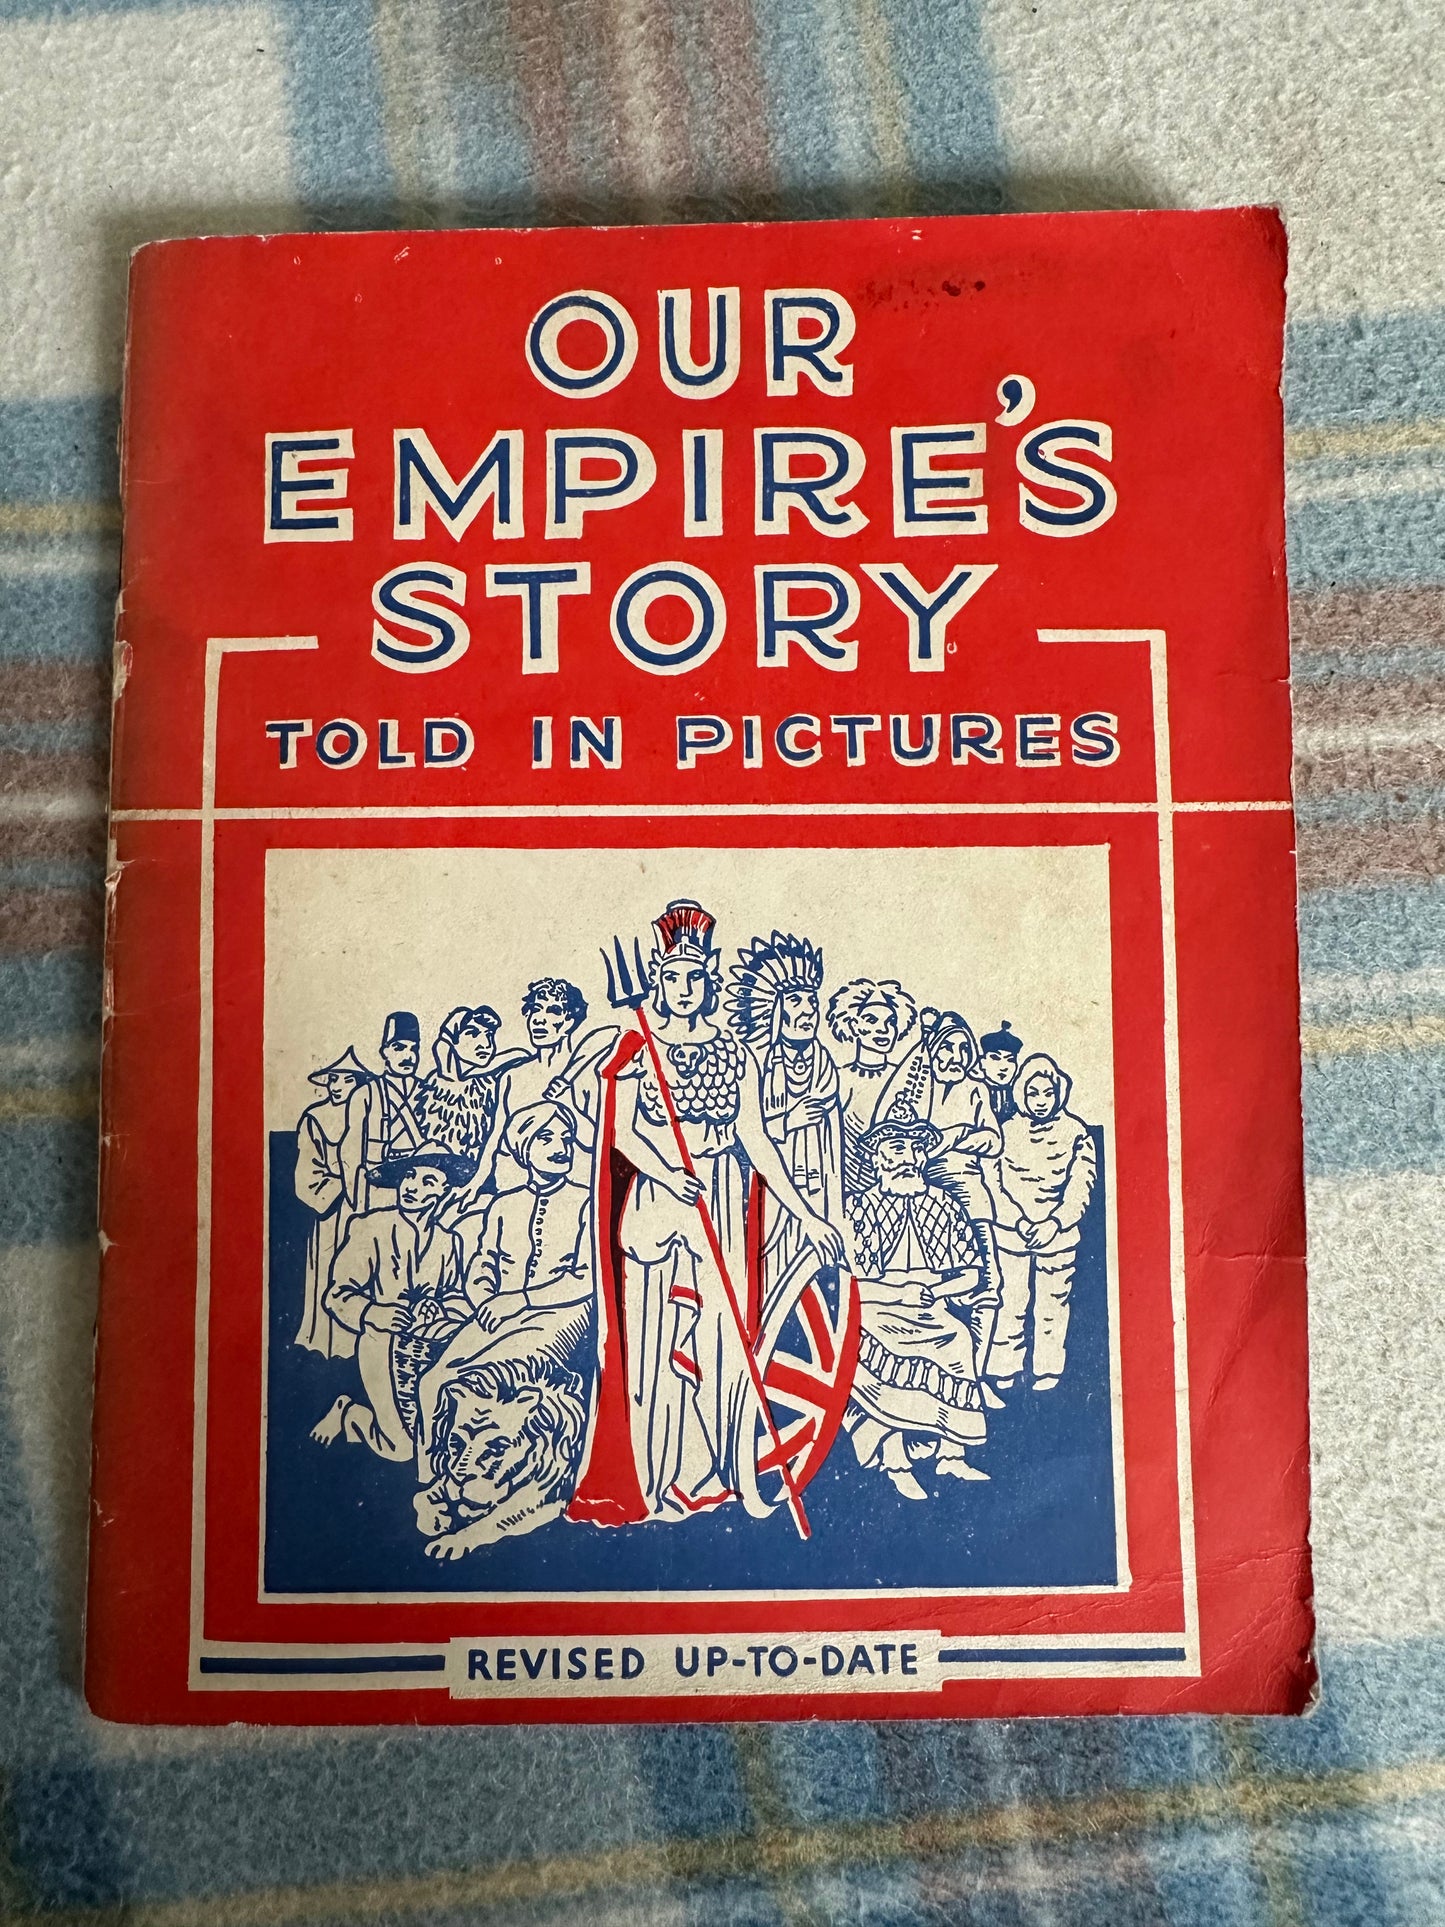 1950’s Our Empire’s Story Told In Pictures - C. W. Airne (Sankey Hudson & Co Ltd)